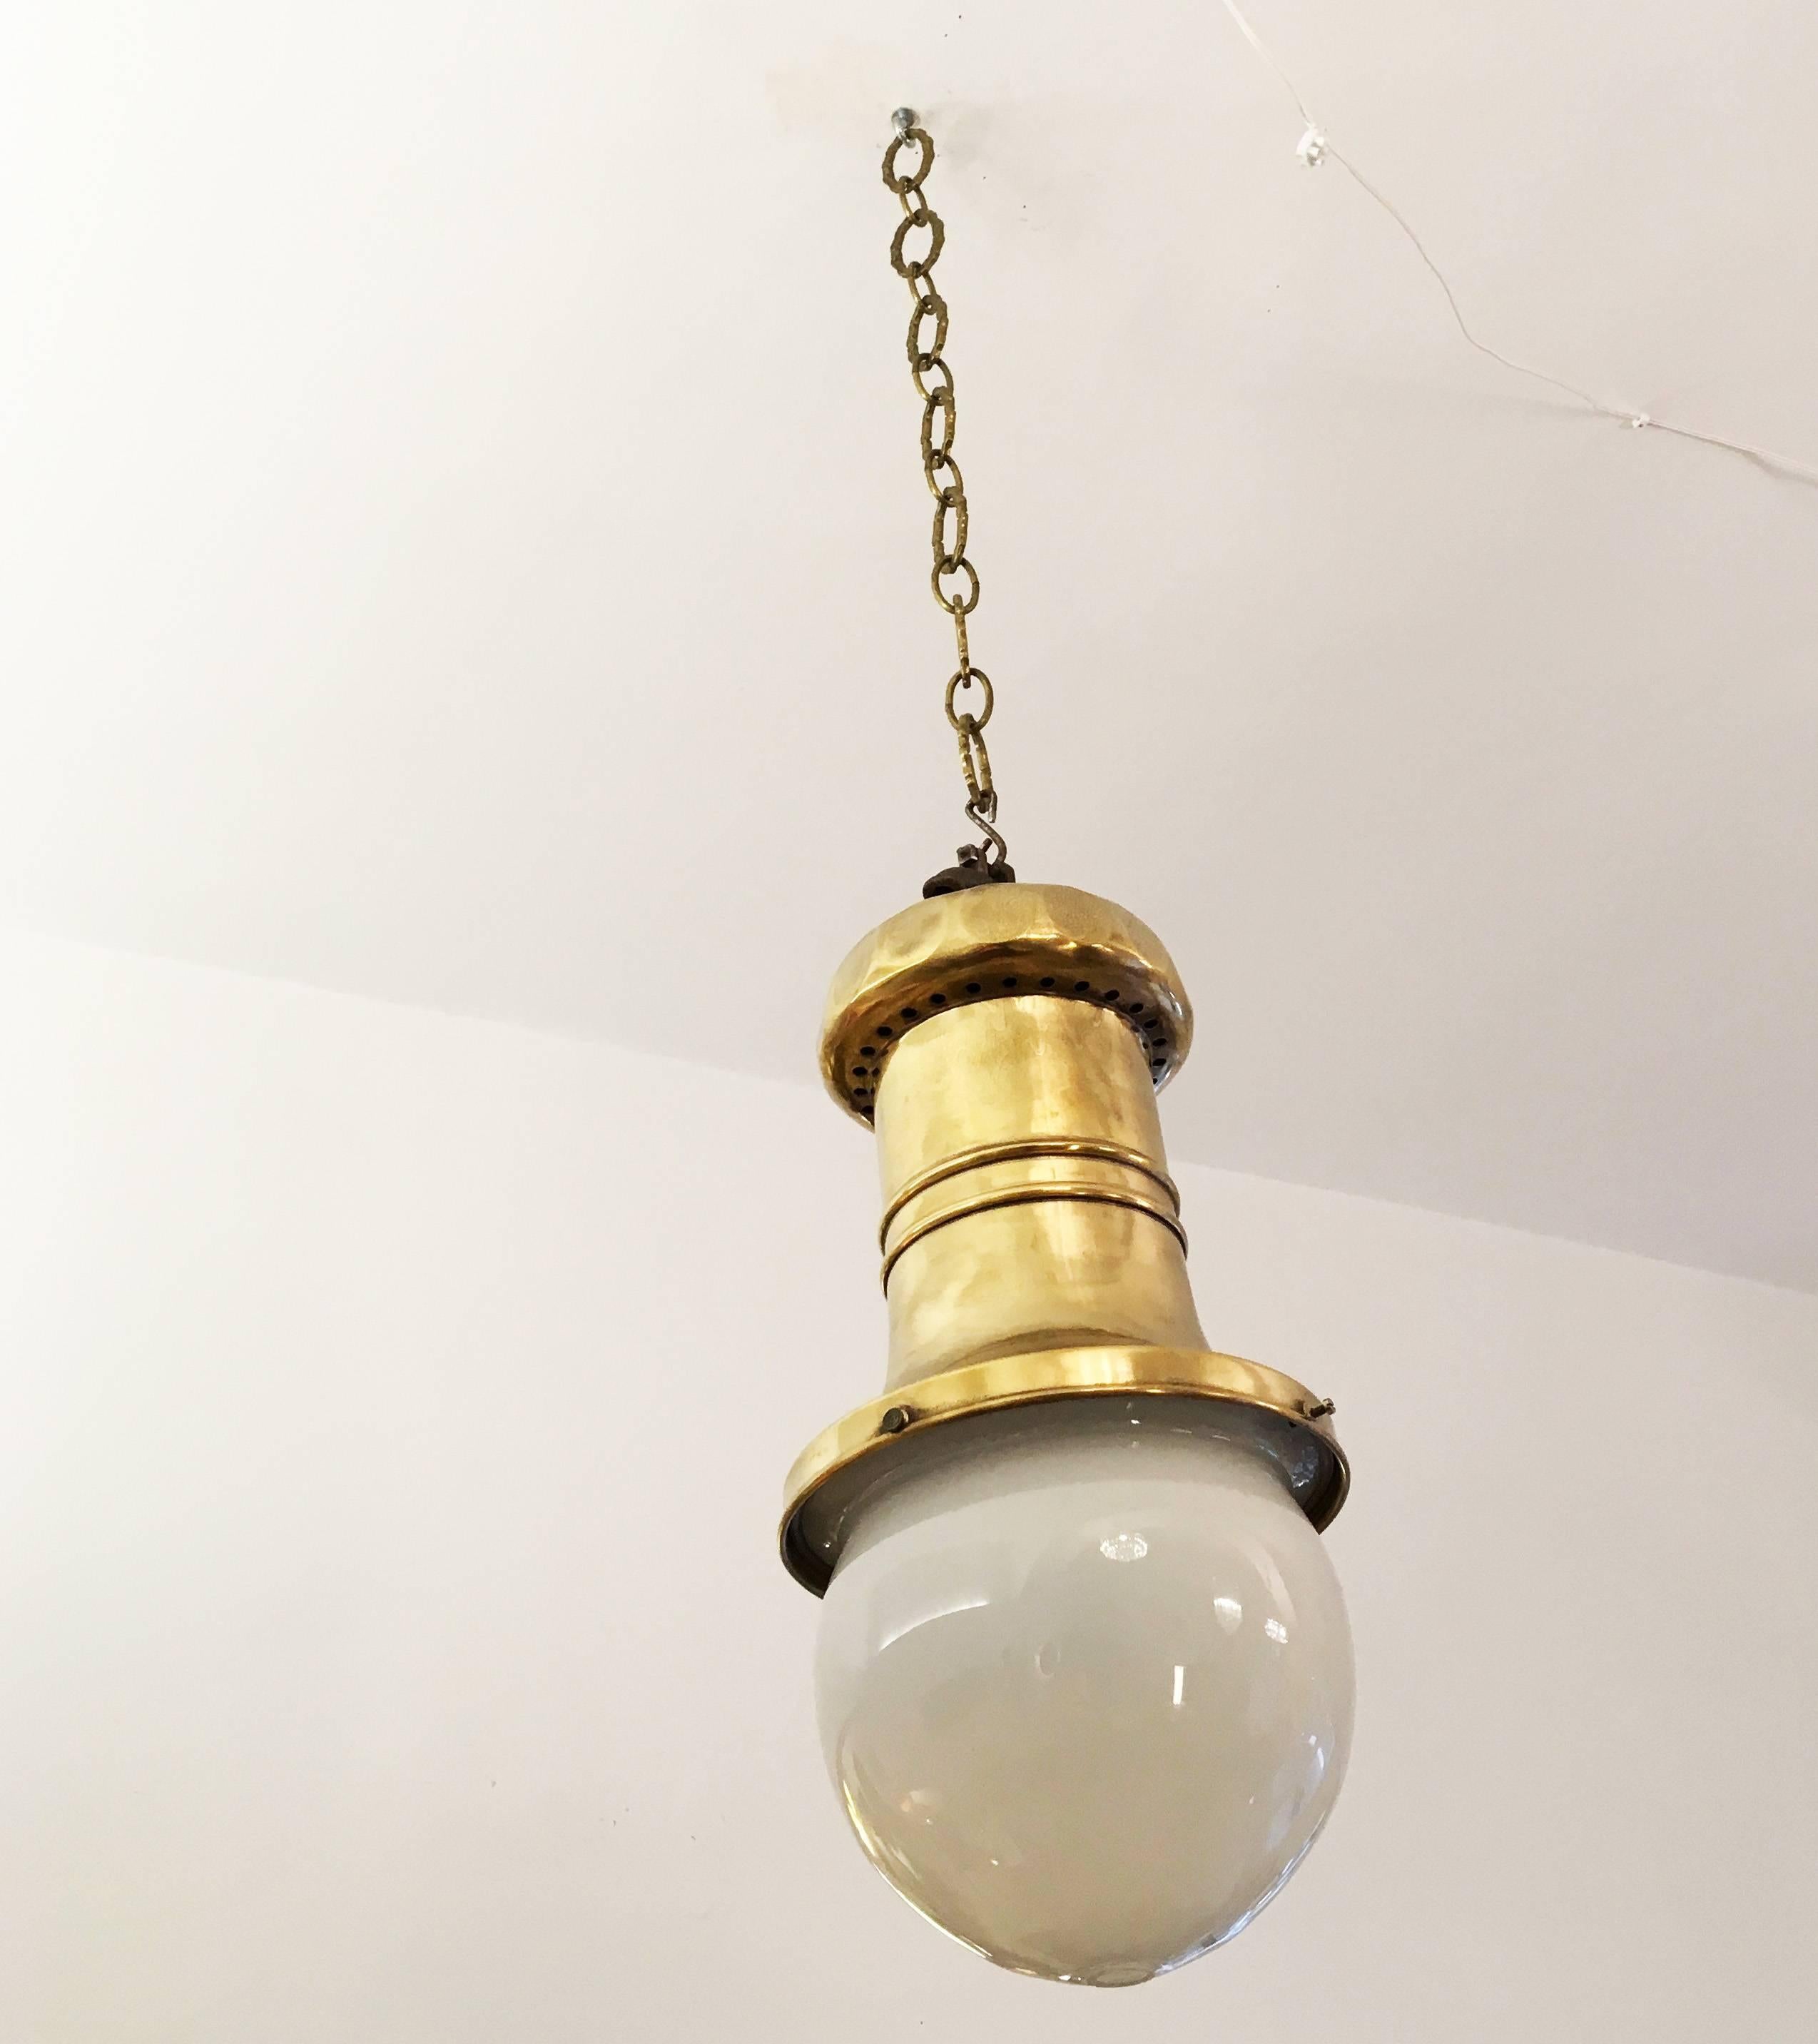 Brass cylinder fitted with E40 socket, now working with E27 adapter and suitable also from the same time but not original from this lamp opaline glass shade. According to the previous owner, the lamp was installed in famous Viennese department store